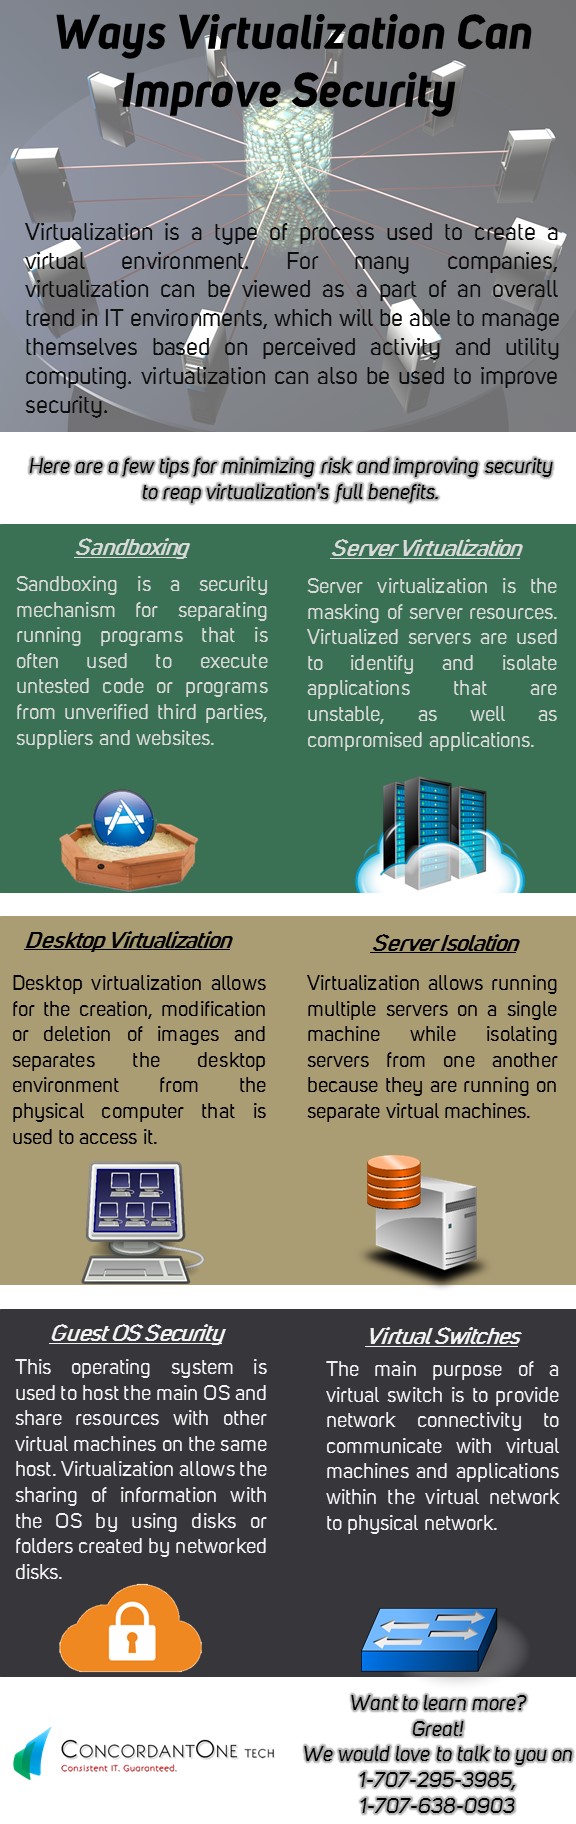 Ways Virtualization can Improve Security